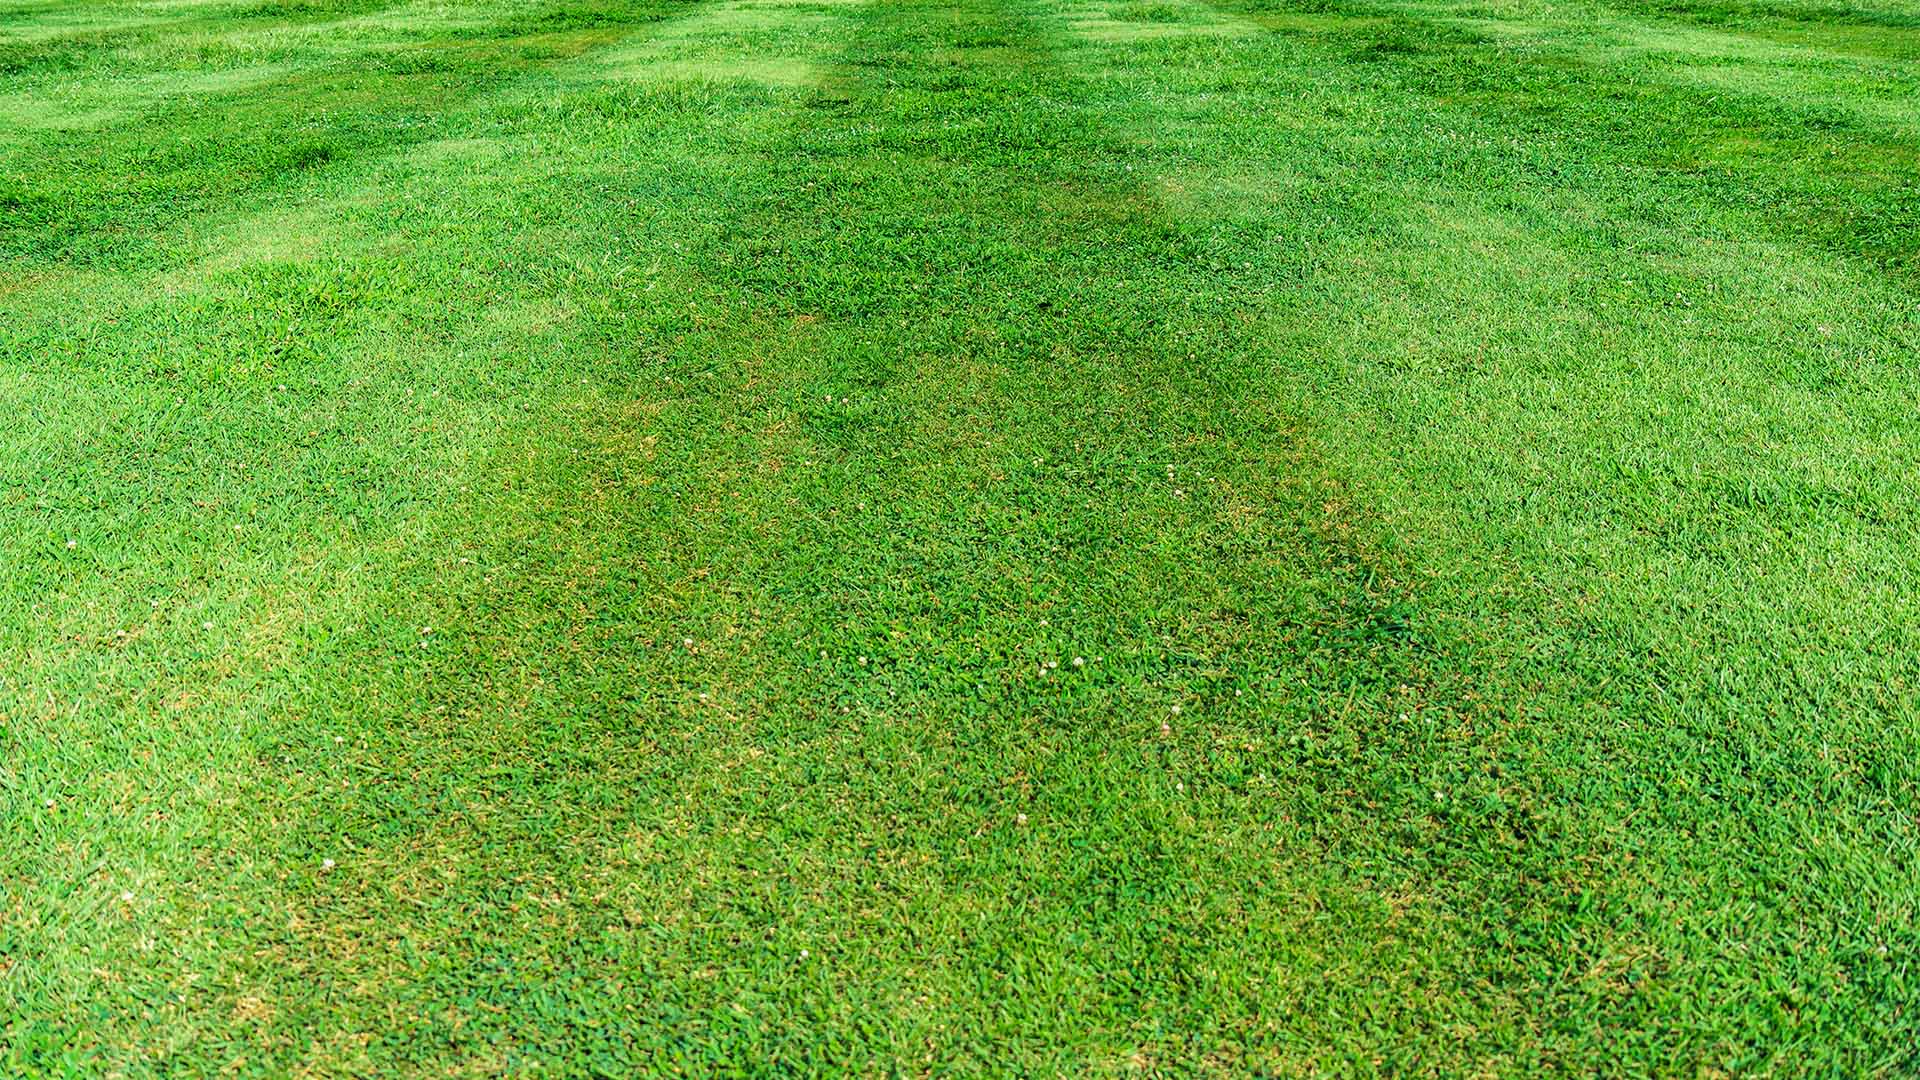 fleming island commercial lawn care services